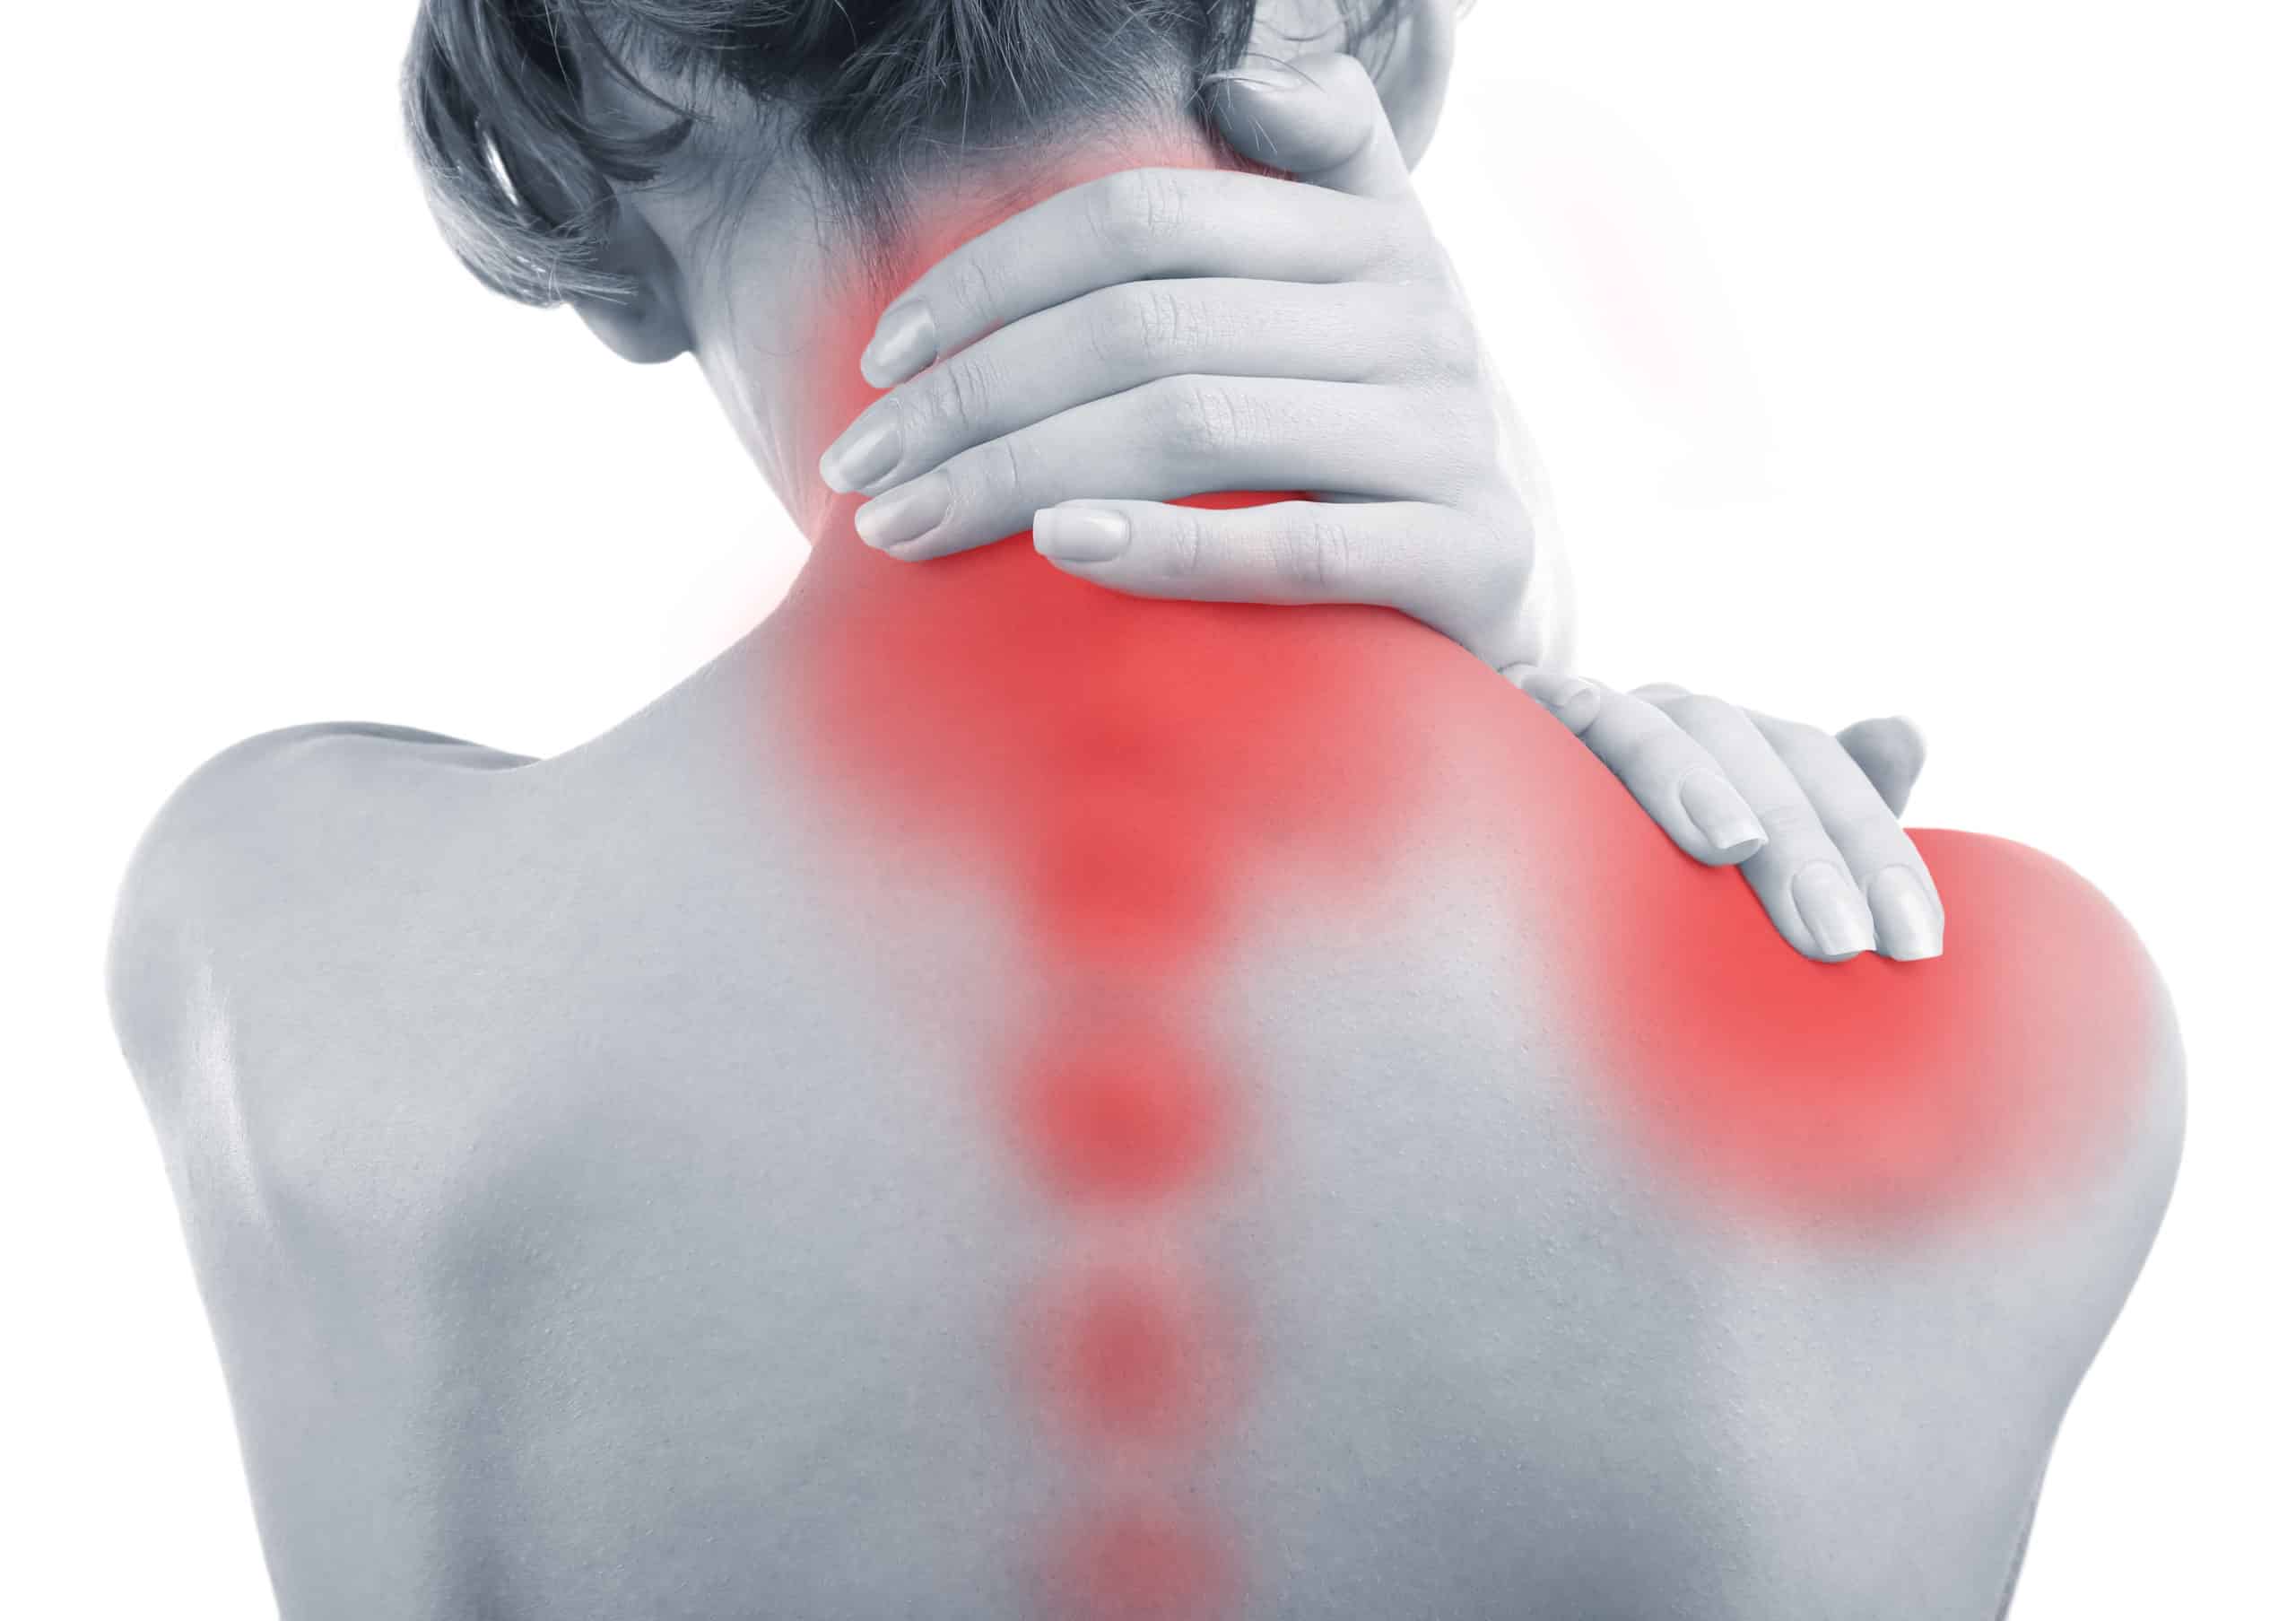 What Can I Do About The Pain In My Neck?